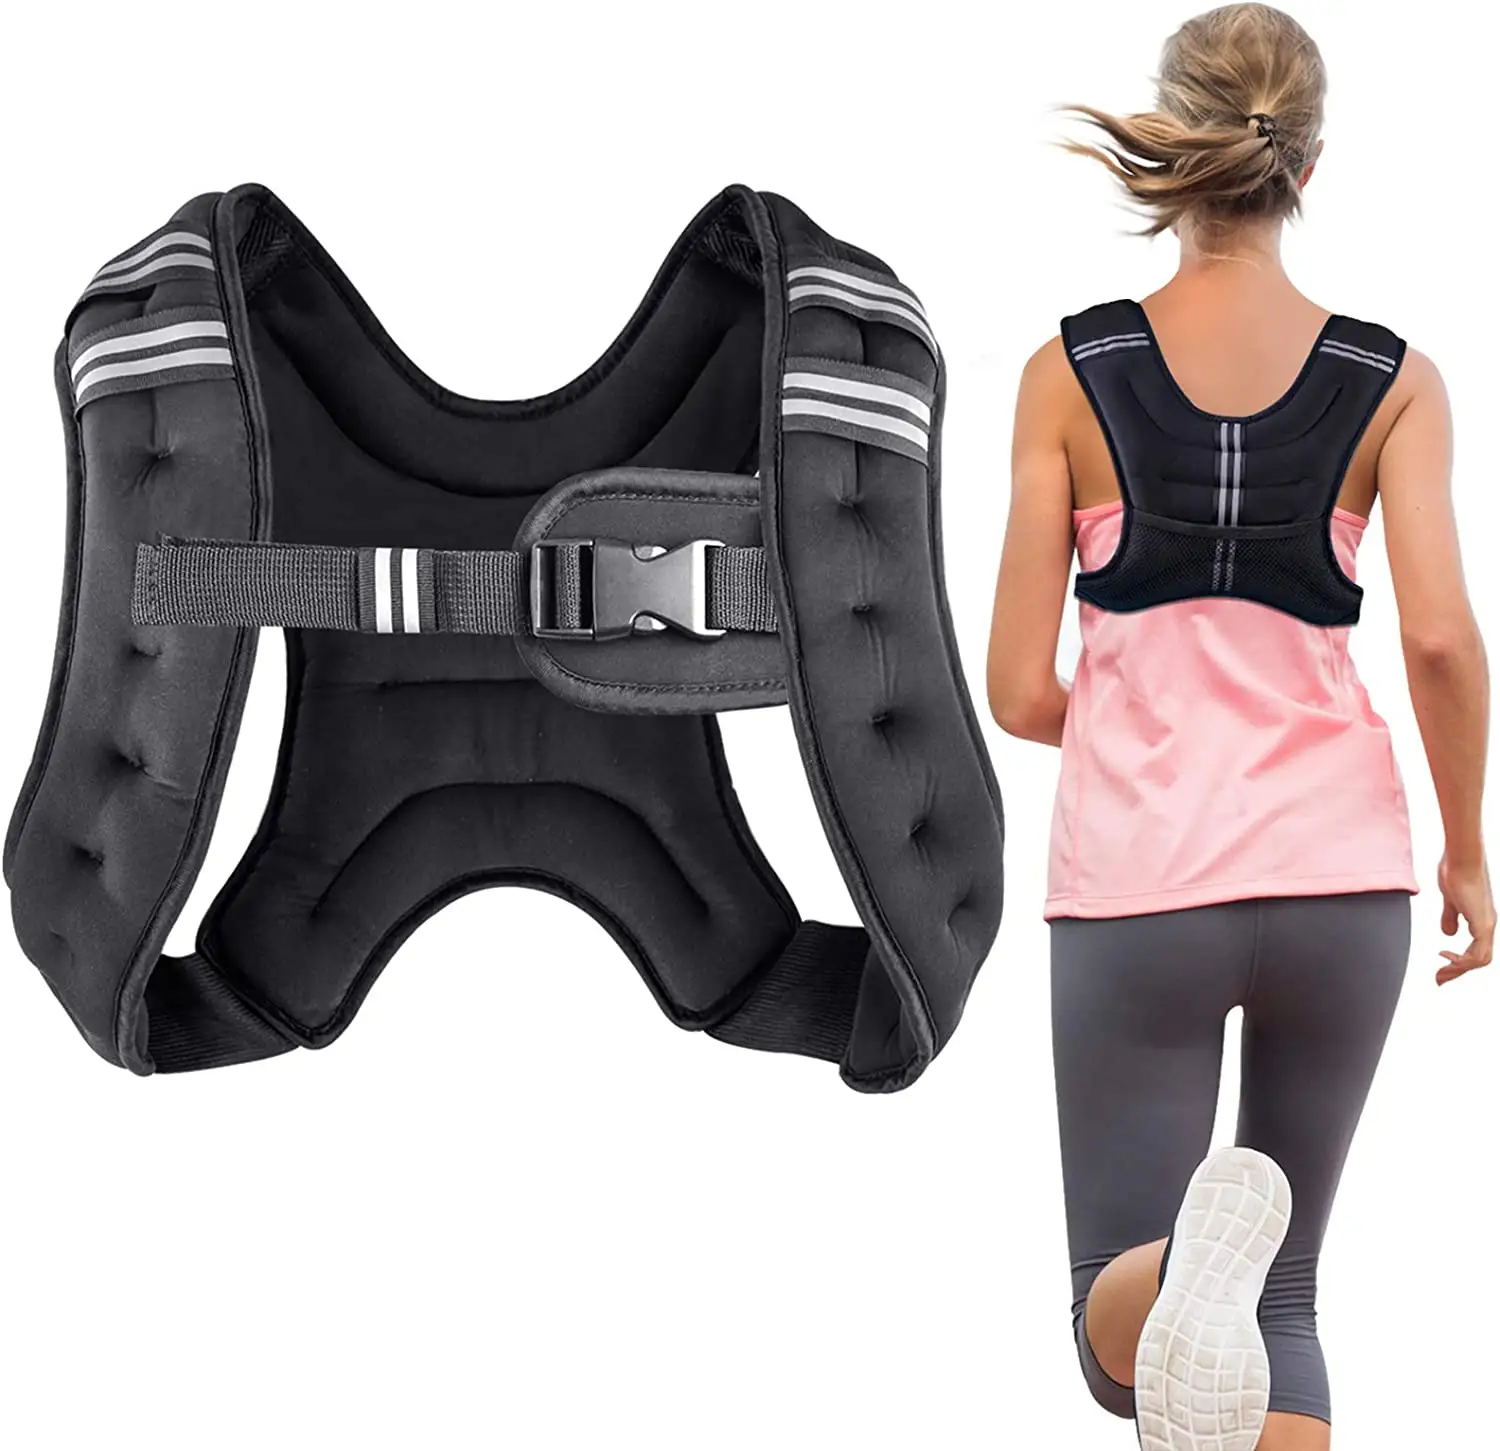 body iron sand crossfit running weight vest for men fitness training